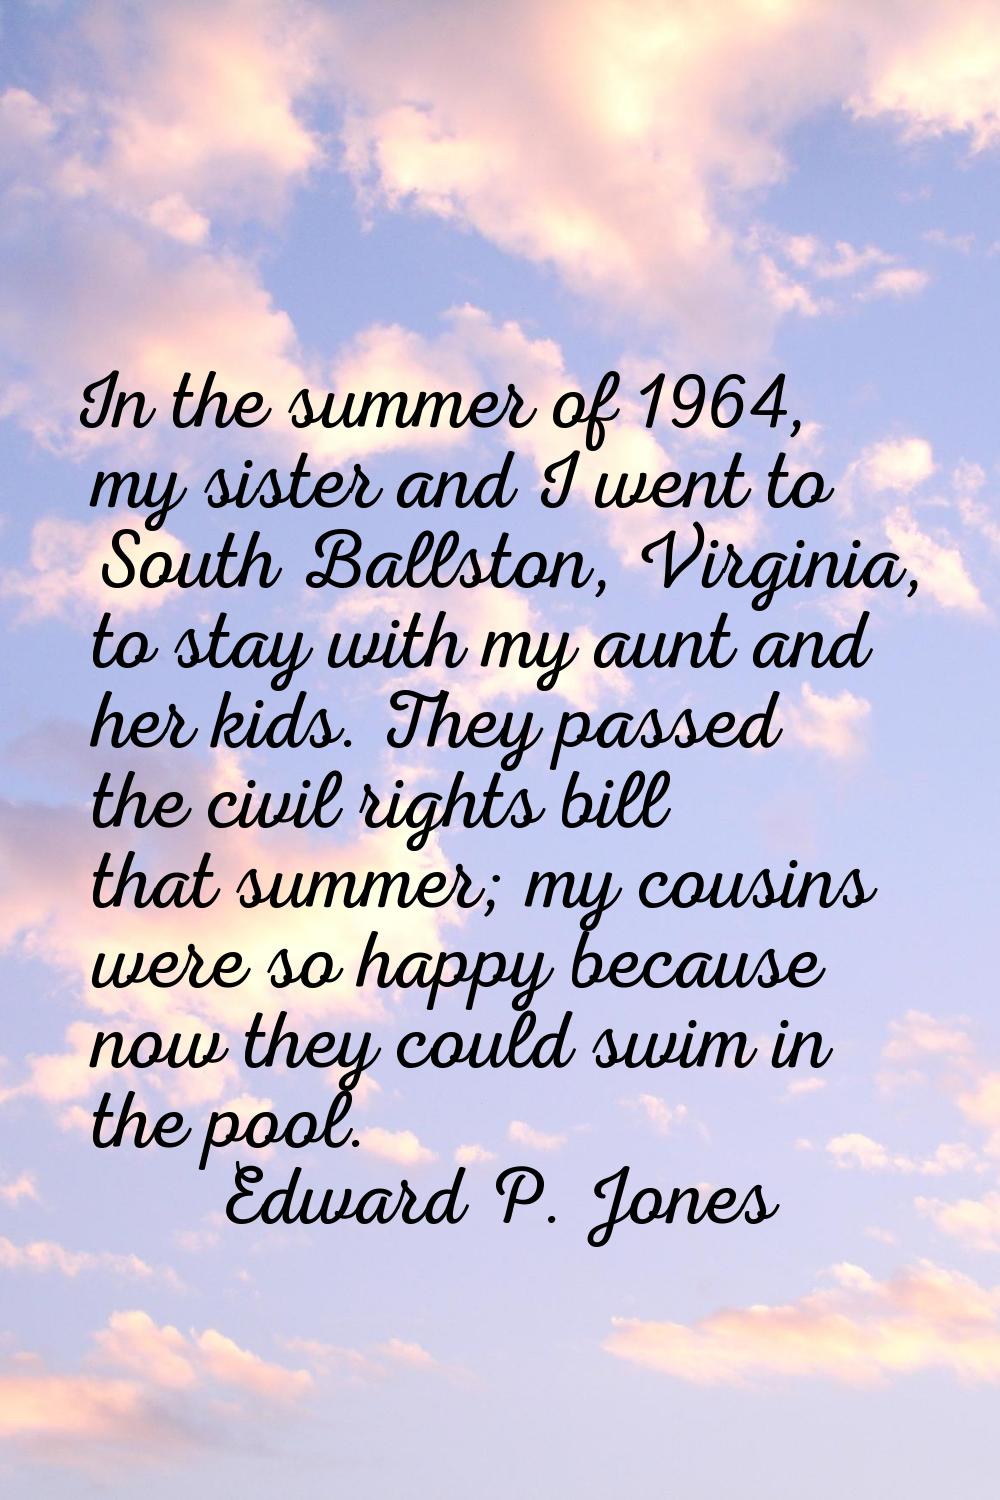 In the summer of 1964, my sister and I went to South Ballston, Virginia, to stay with my aunt and h